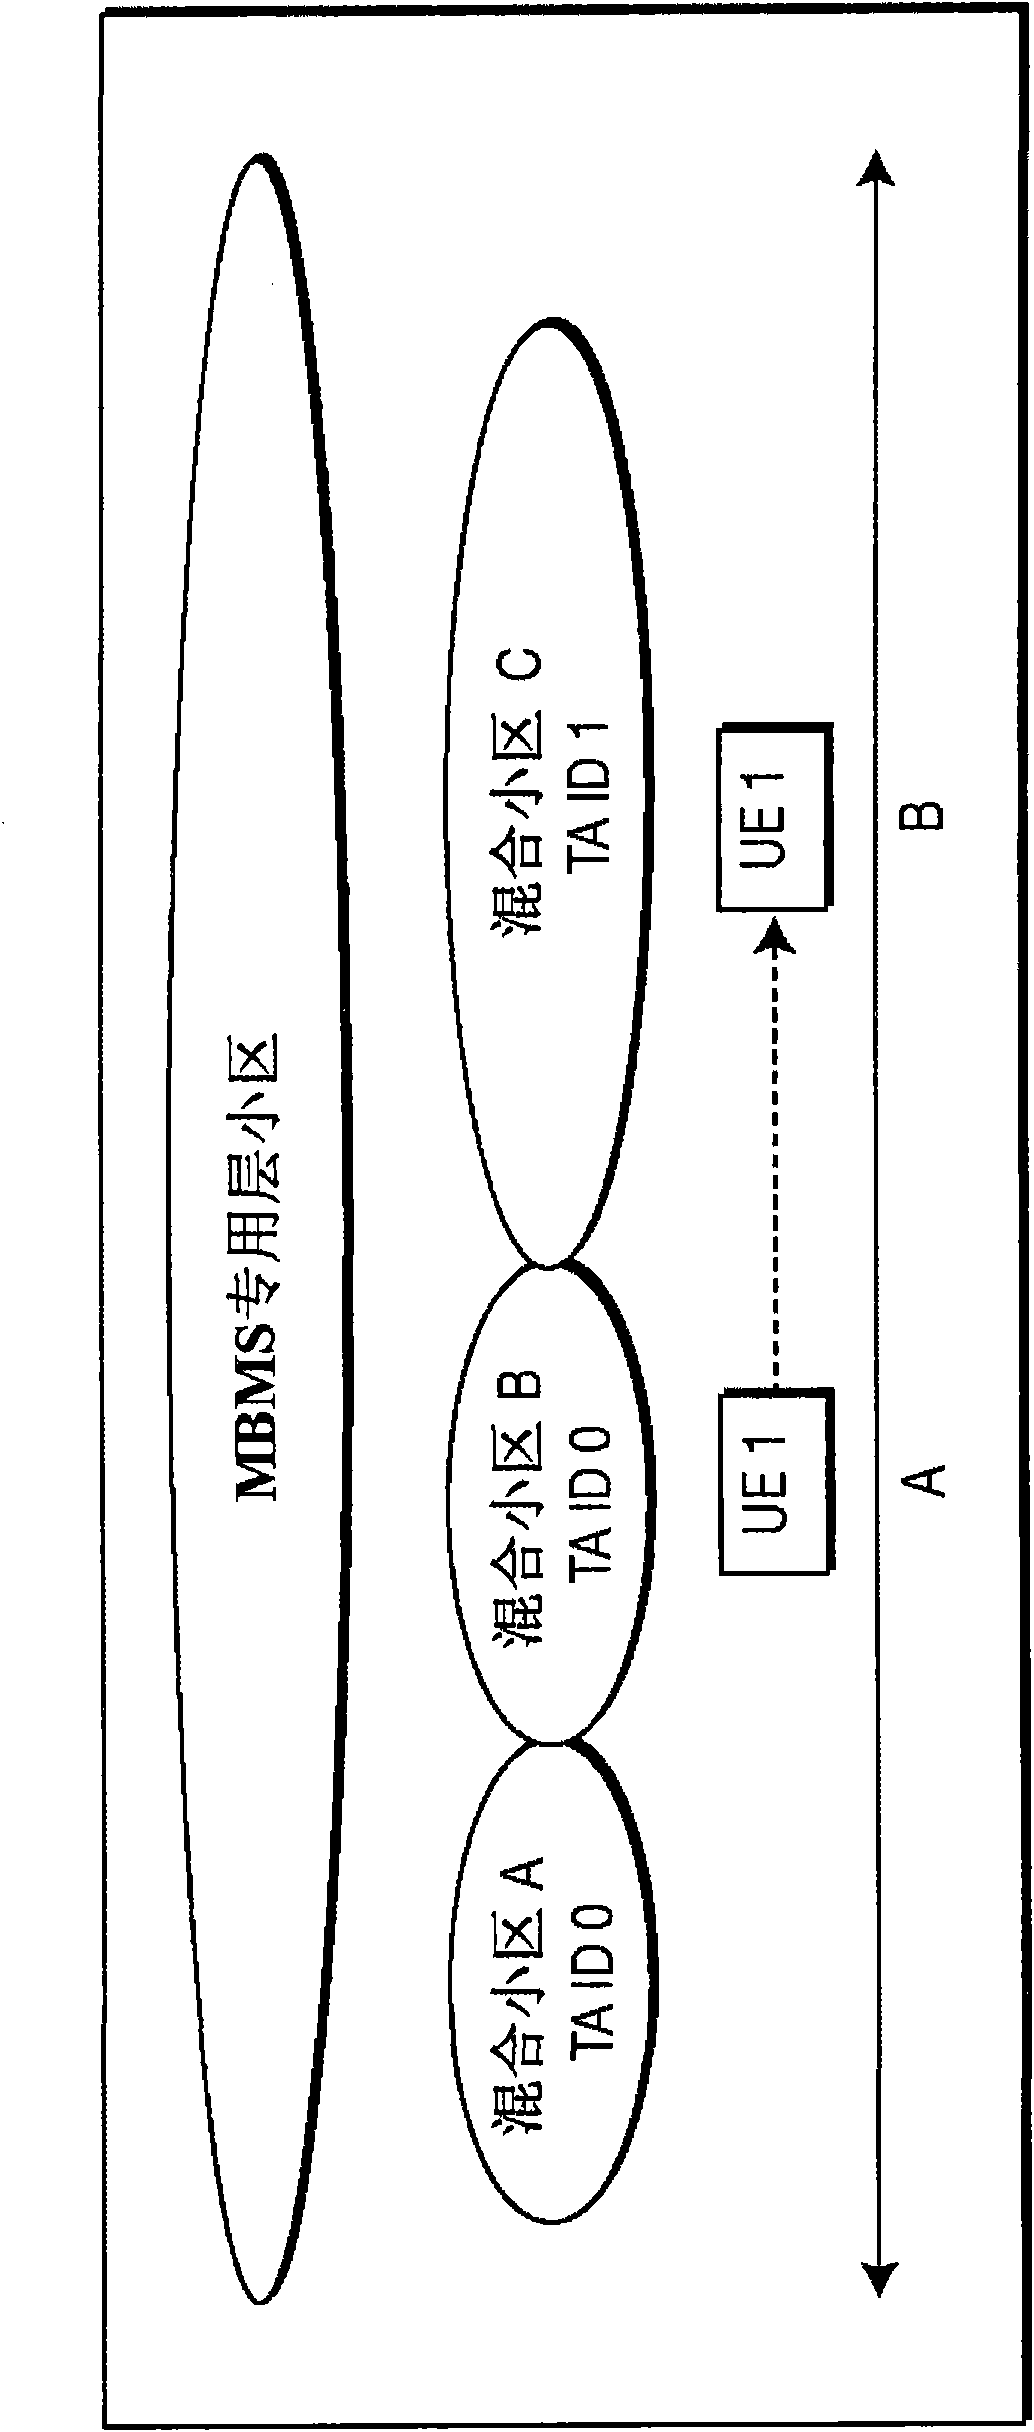 Method and apparatus of measurement mechanism and efficient paging and broadcasting scheme implementation in mbms dedicated cell of lte systems